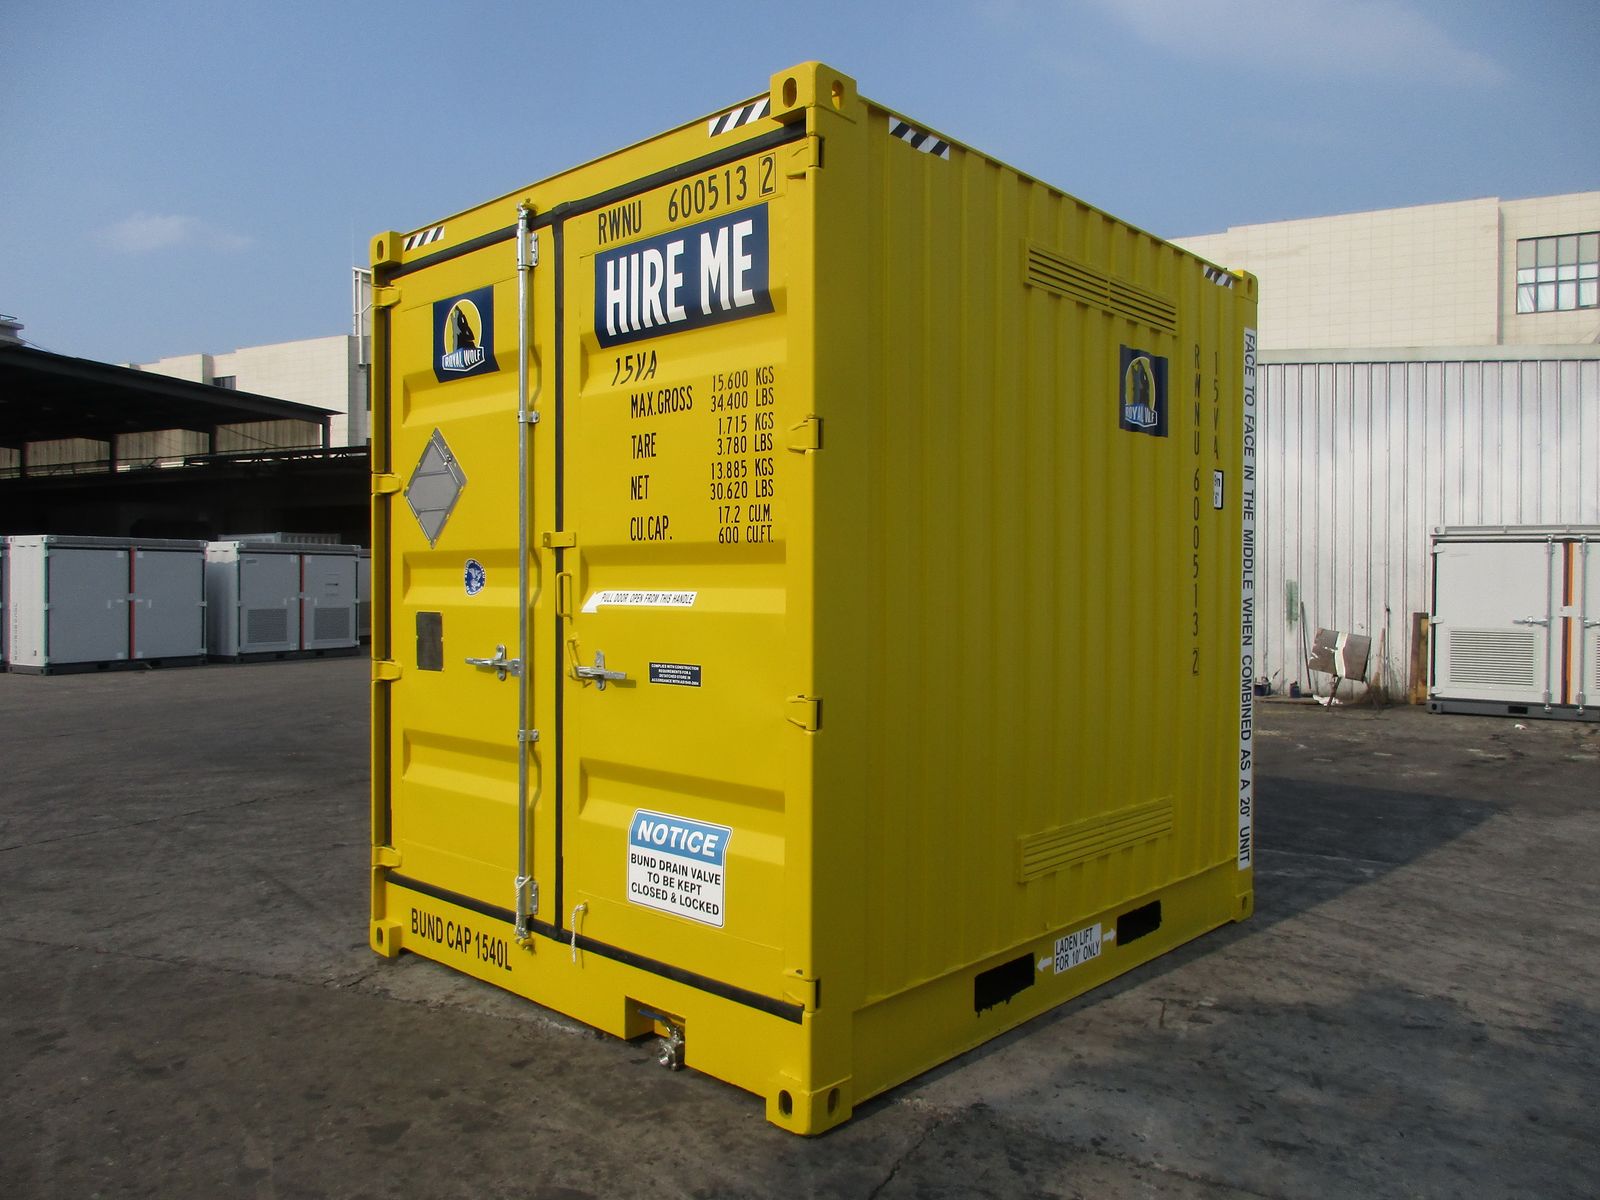 10ft Dangerous Goods and Chemical Storage Containers